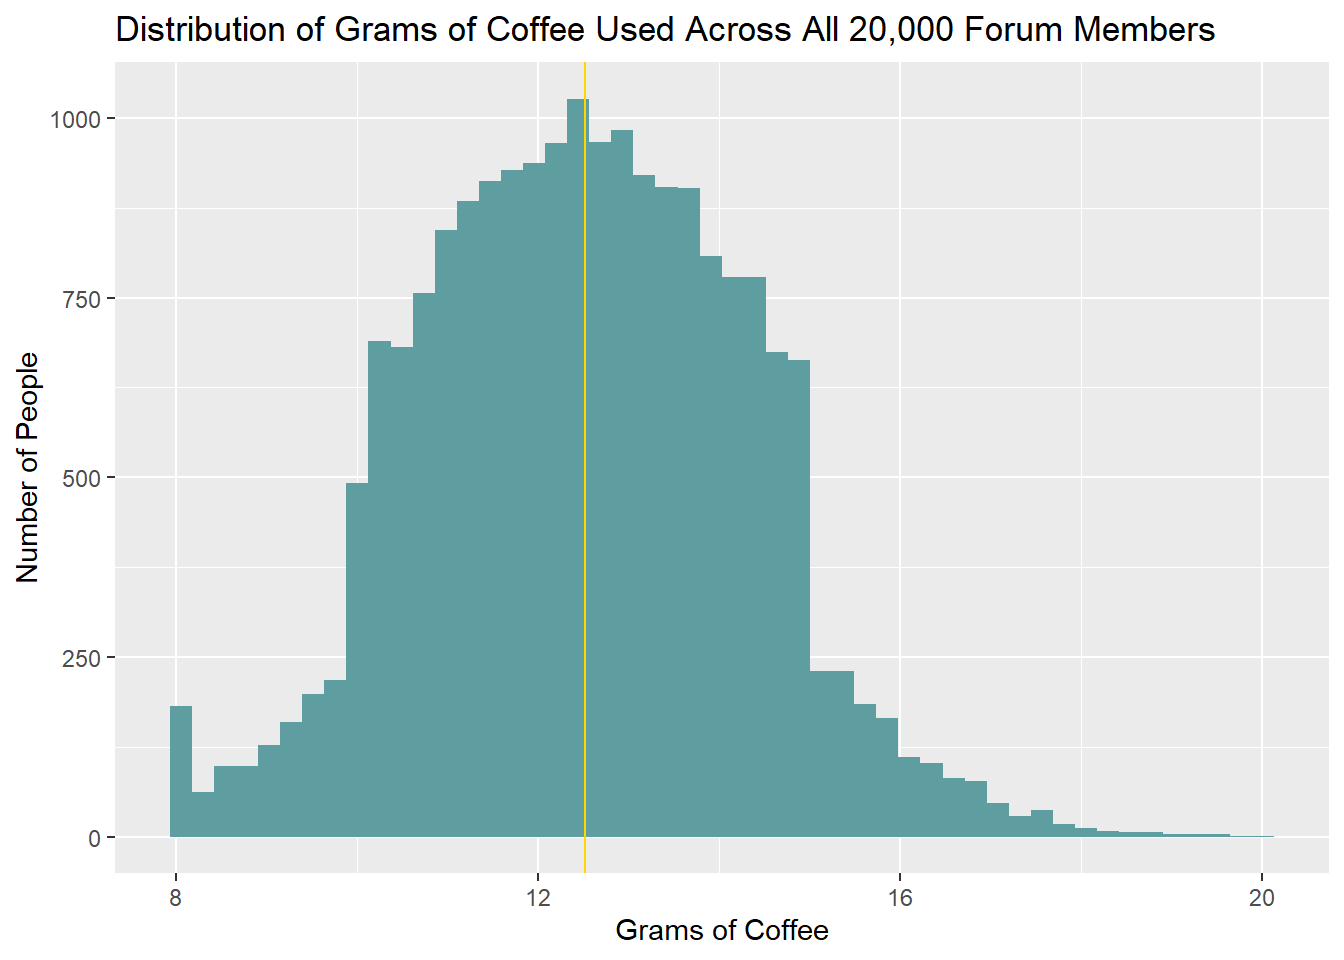 distribution of grams of coffee used across all forum members, faux data